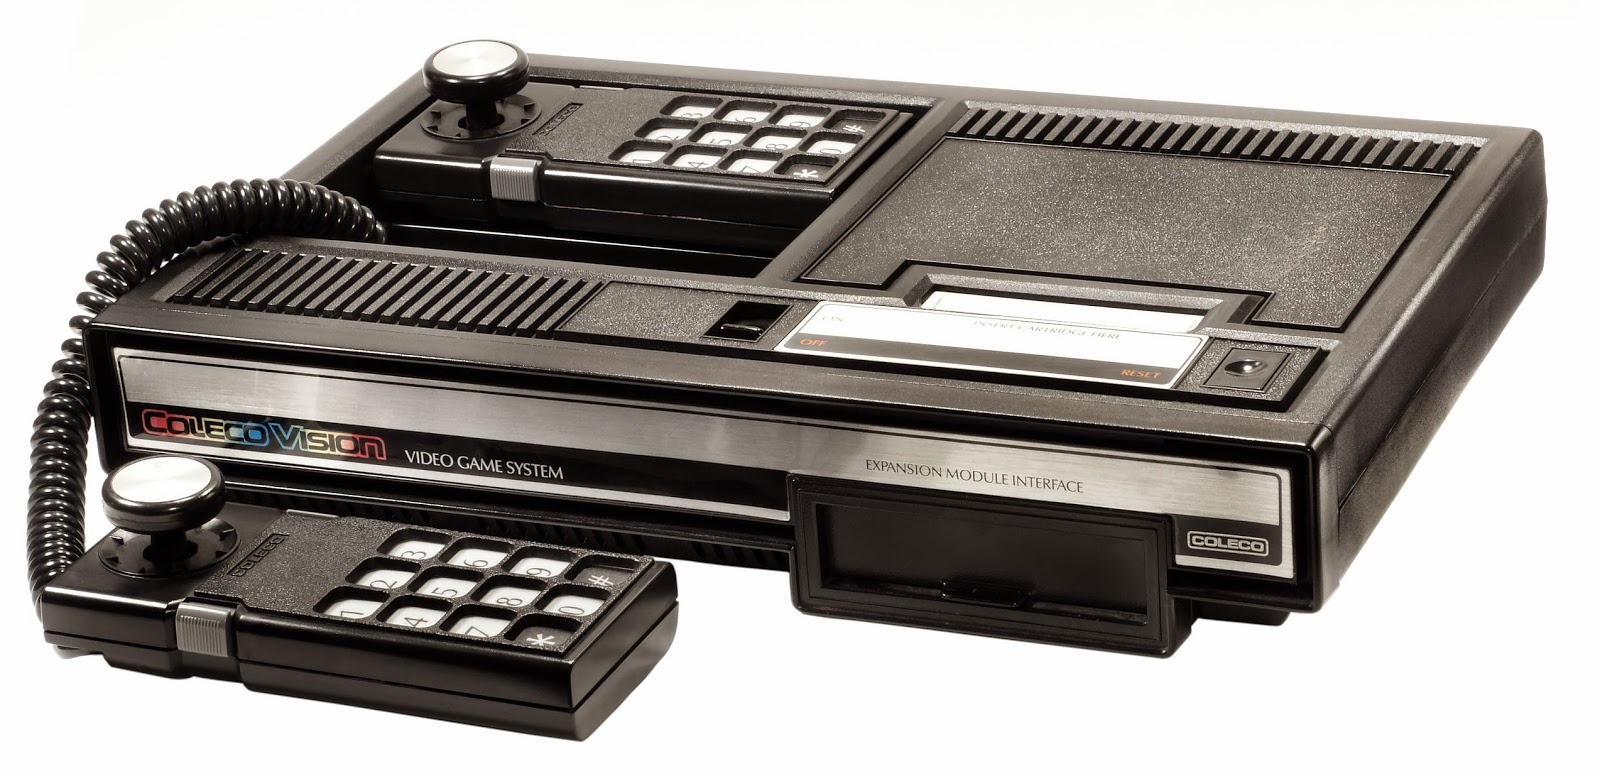 1980s video game crash secrets -- Coming of The ColecoVision